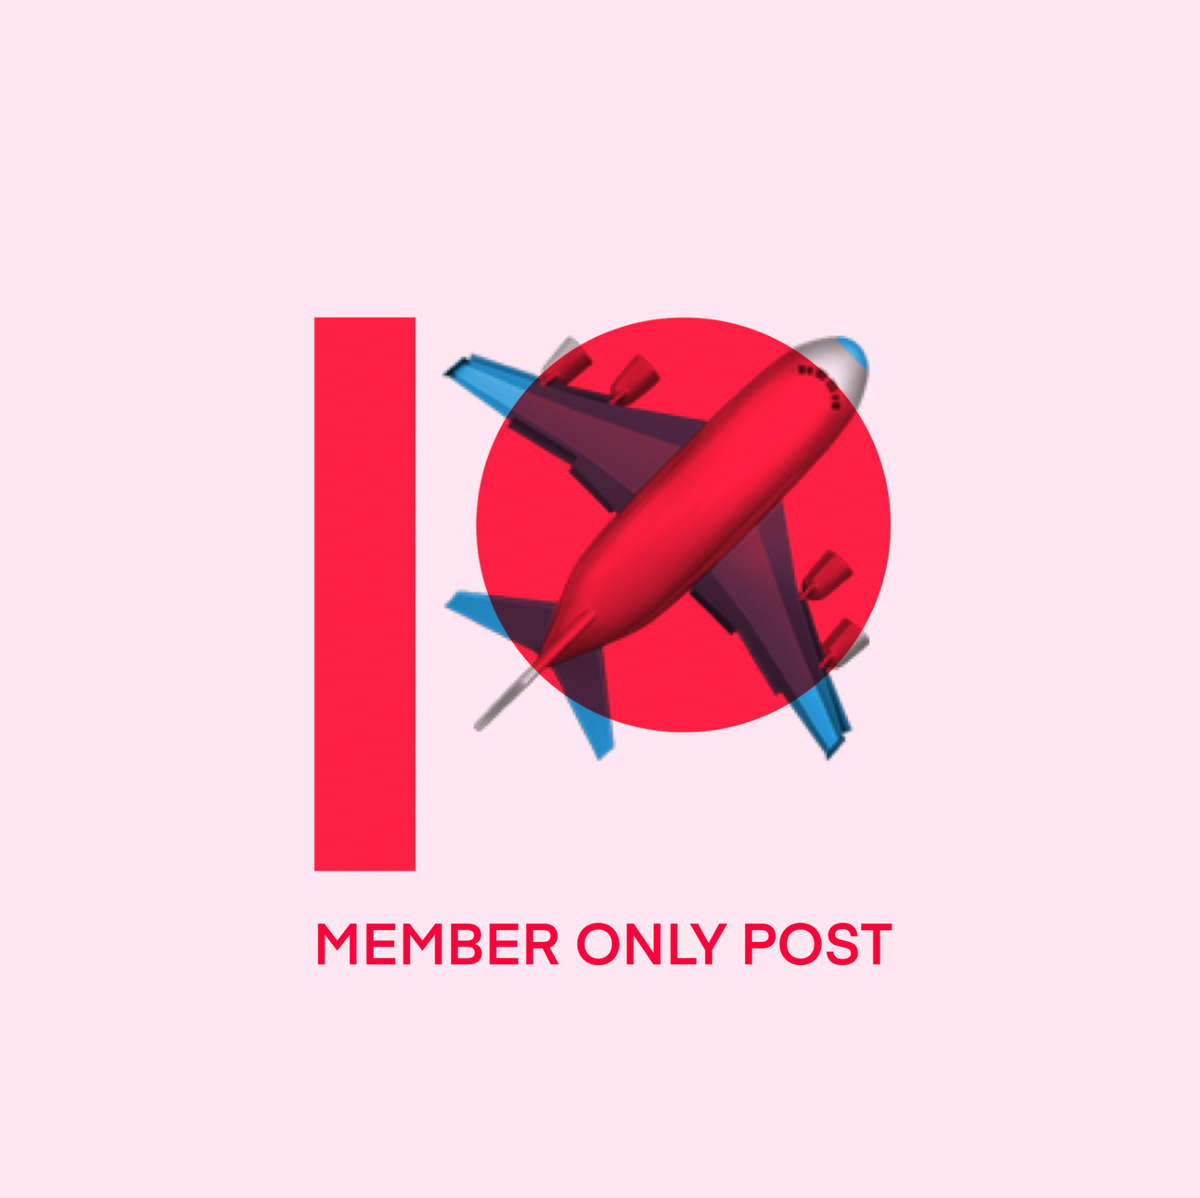 "Member Only Post" a Patreon logo, and an emoji of an airplane 